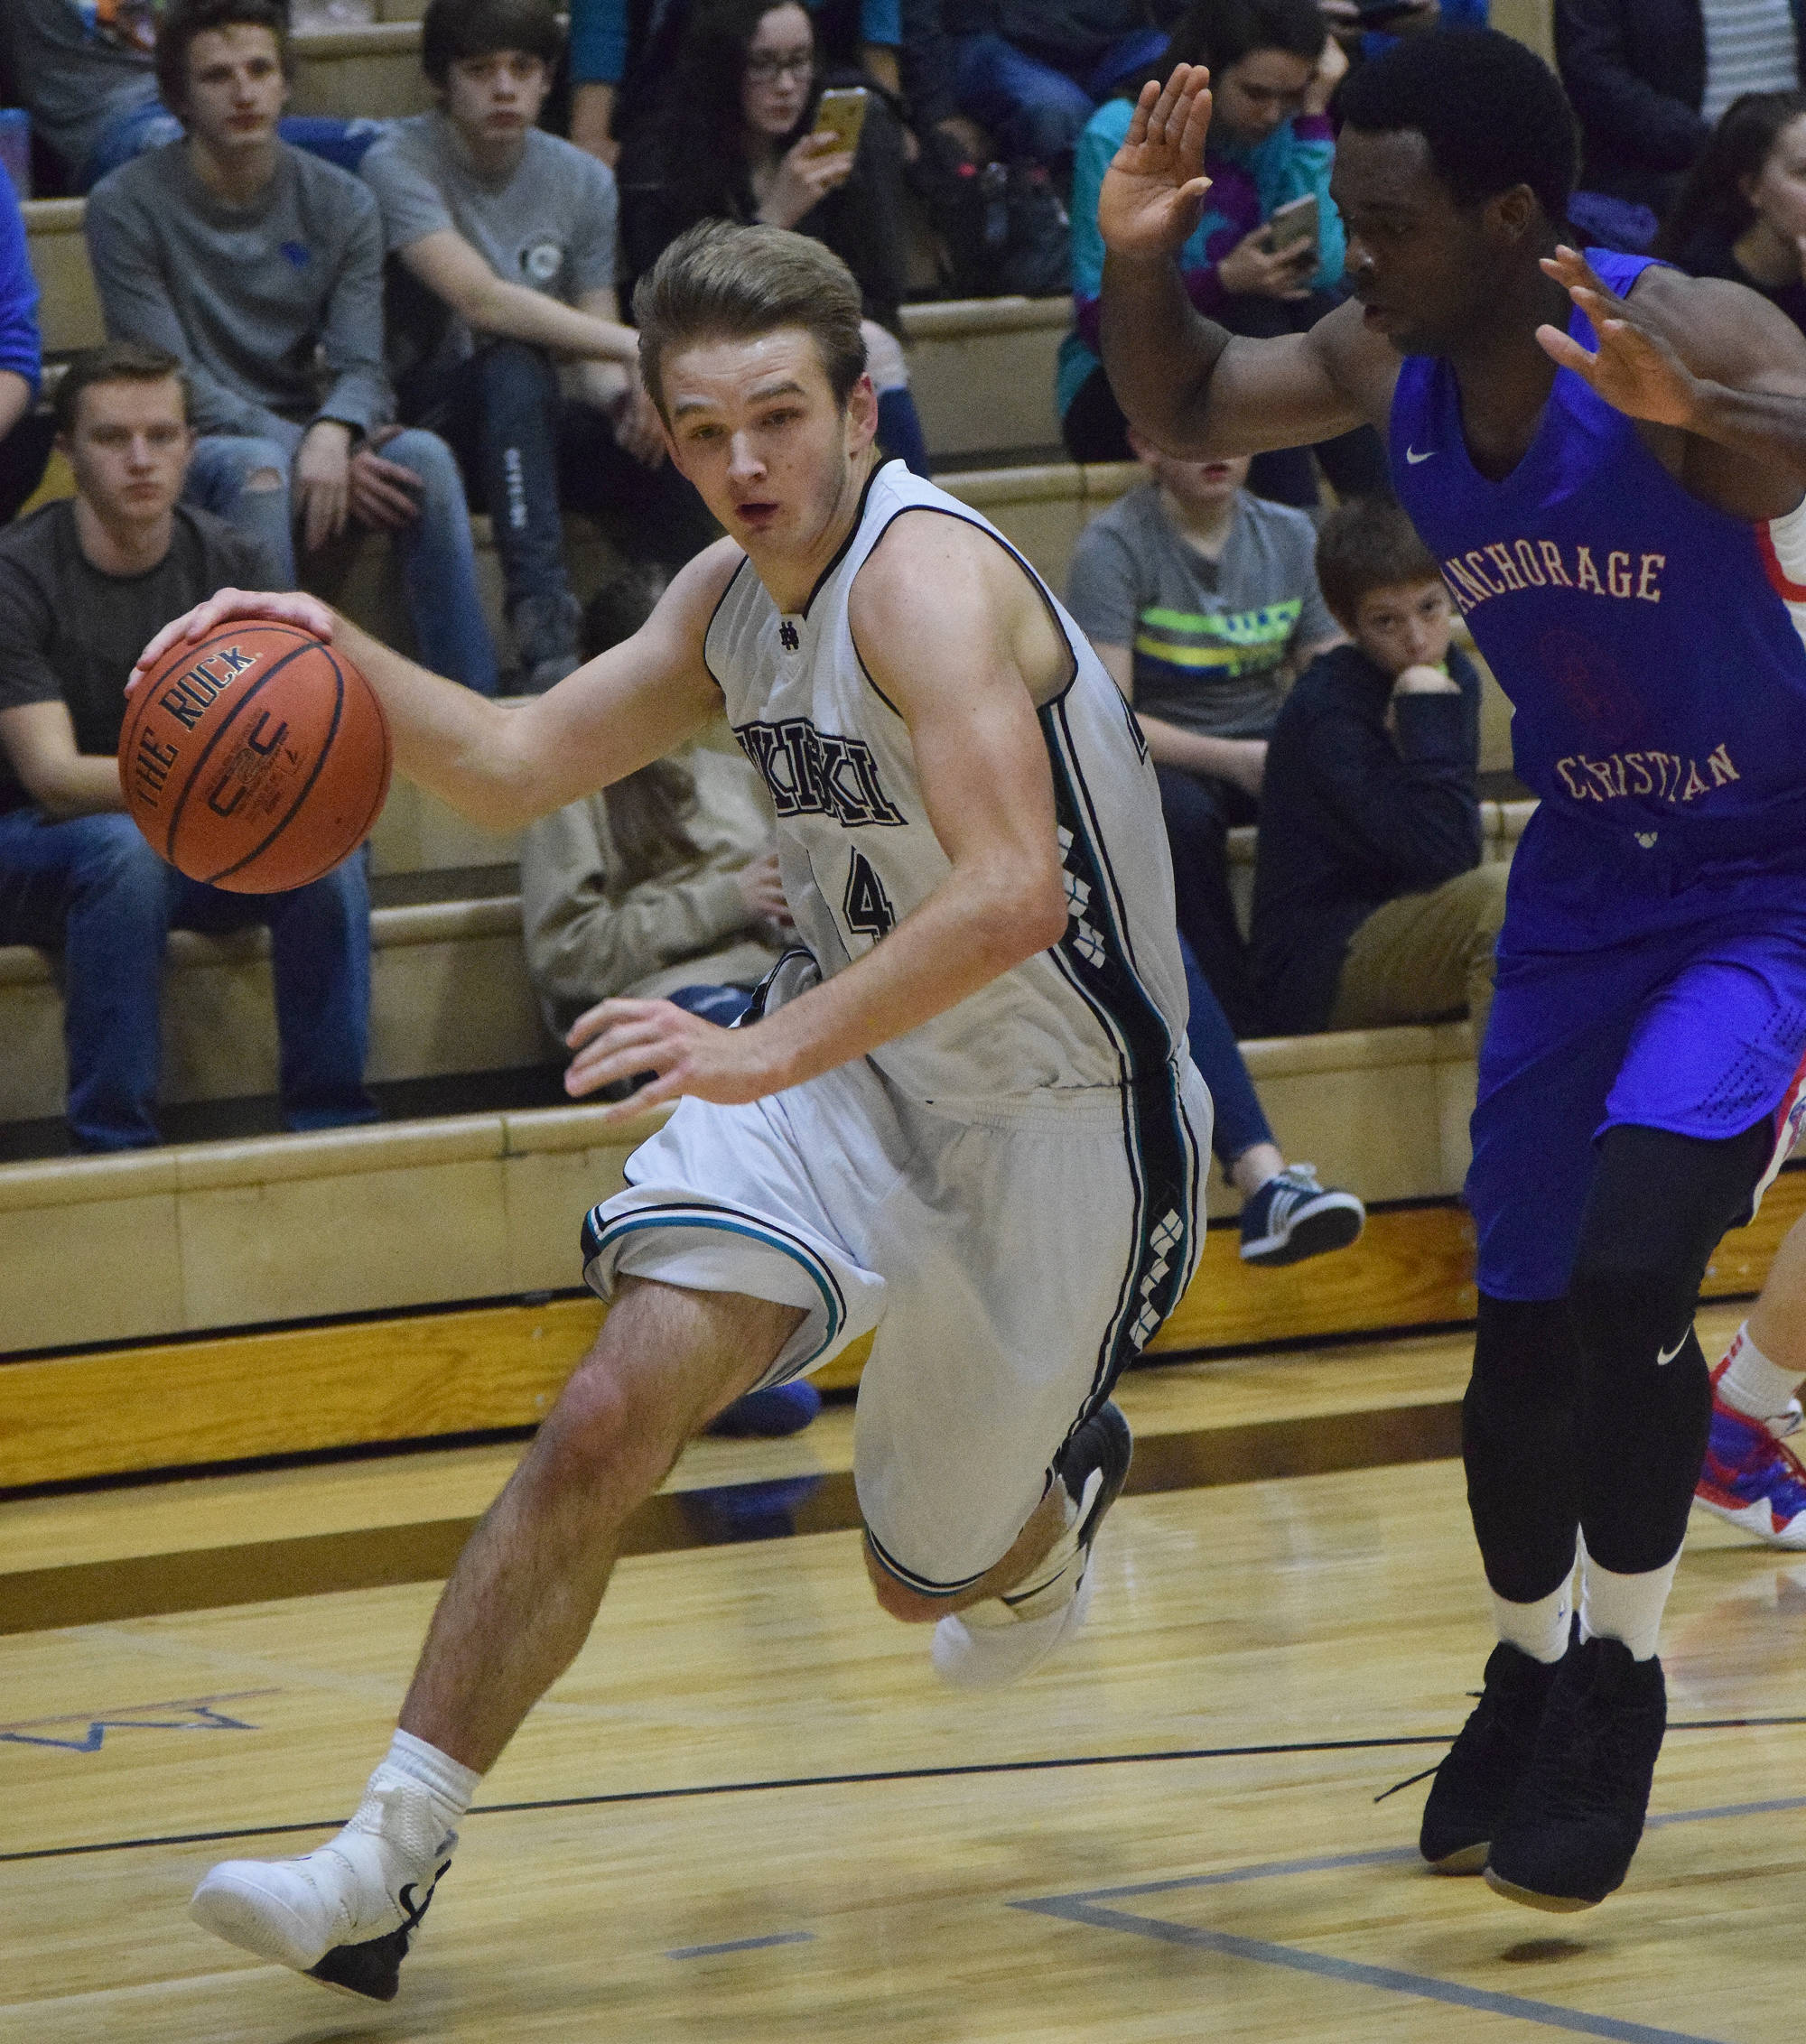 Nikiski’s Michael Eiter (left) dribbles against Anchorage’s Frederick Onochie Friday in a Southcentral Conference contest at Nikiski High School. (Photo by Joey Klecka/Peninsula Clarion)